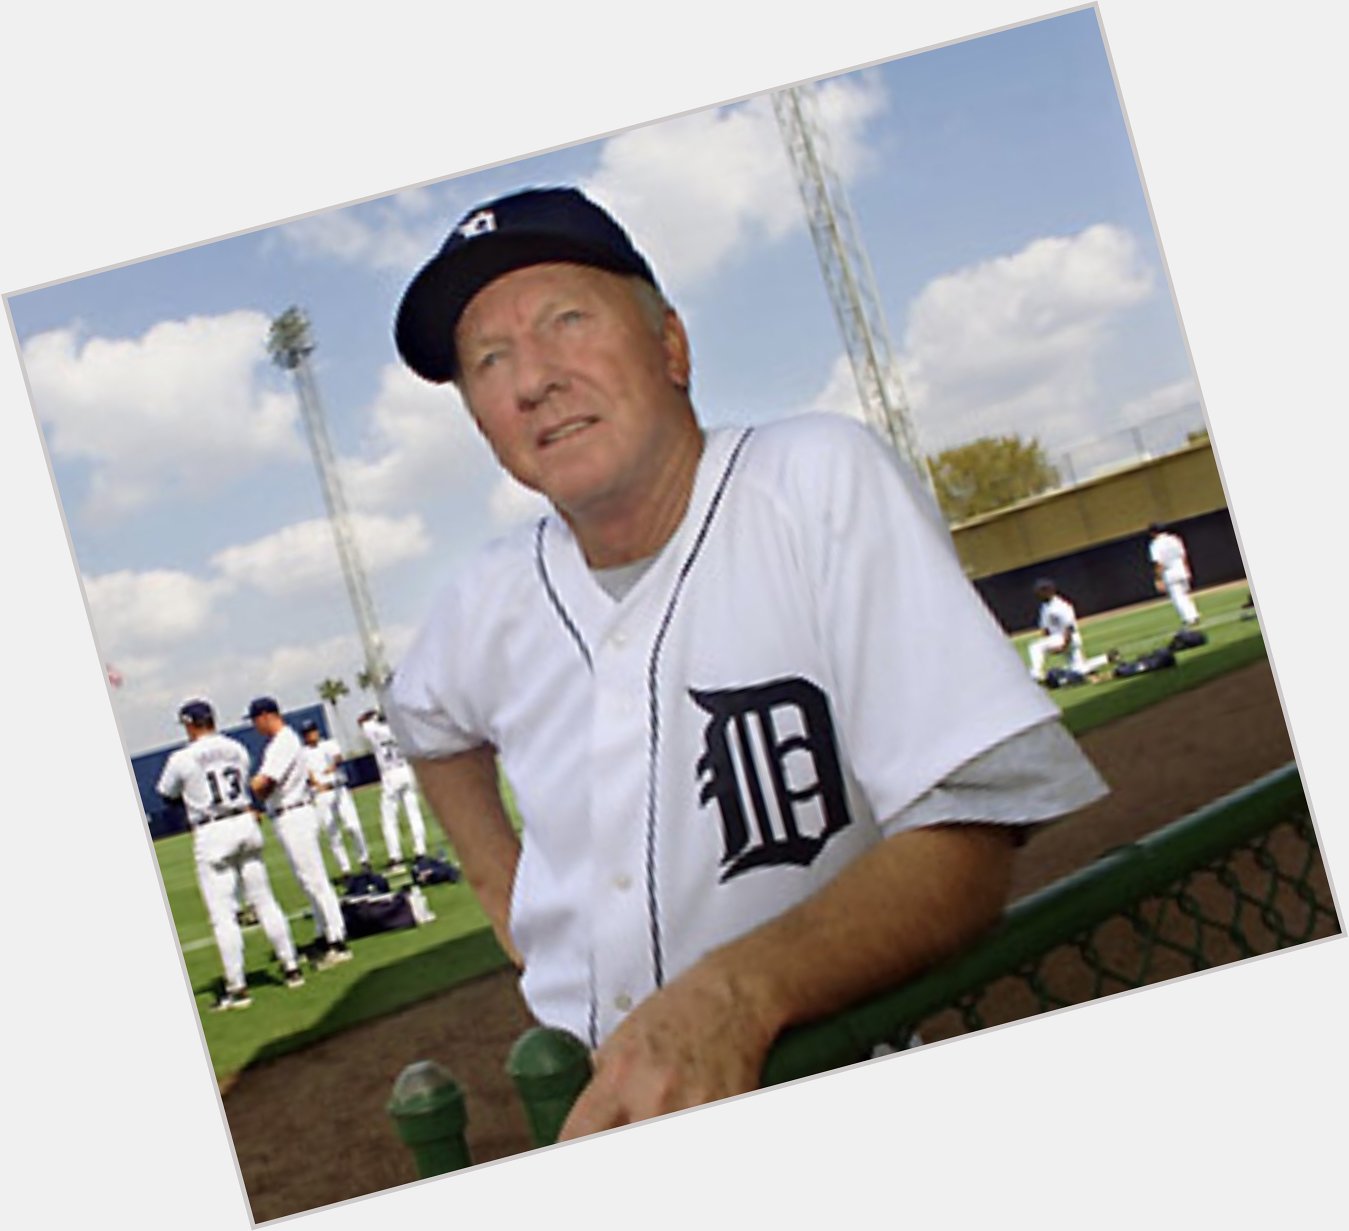 Happy 84th birthday to Mr Tiger, Al Kaline. 3007 hits. 399 homers. Hall of Famer and super nice guy. 